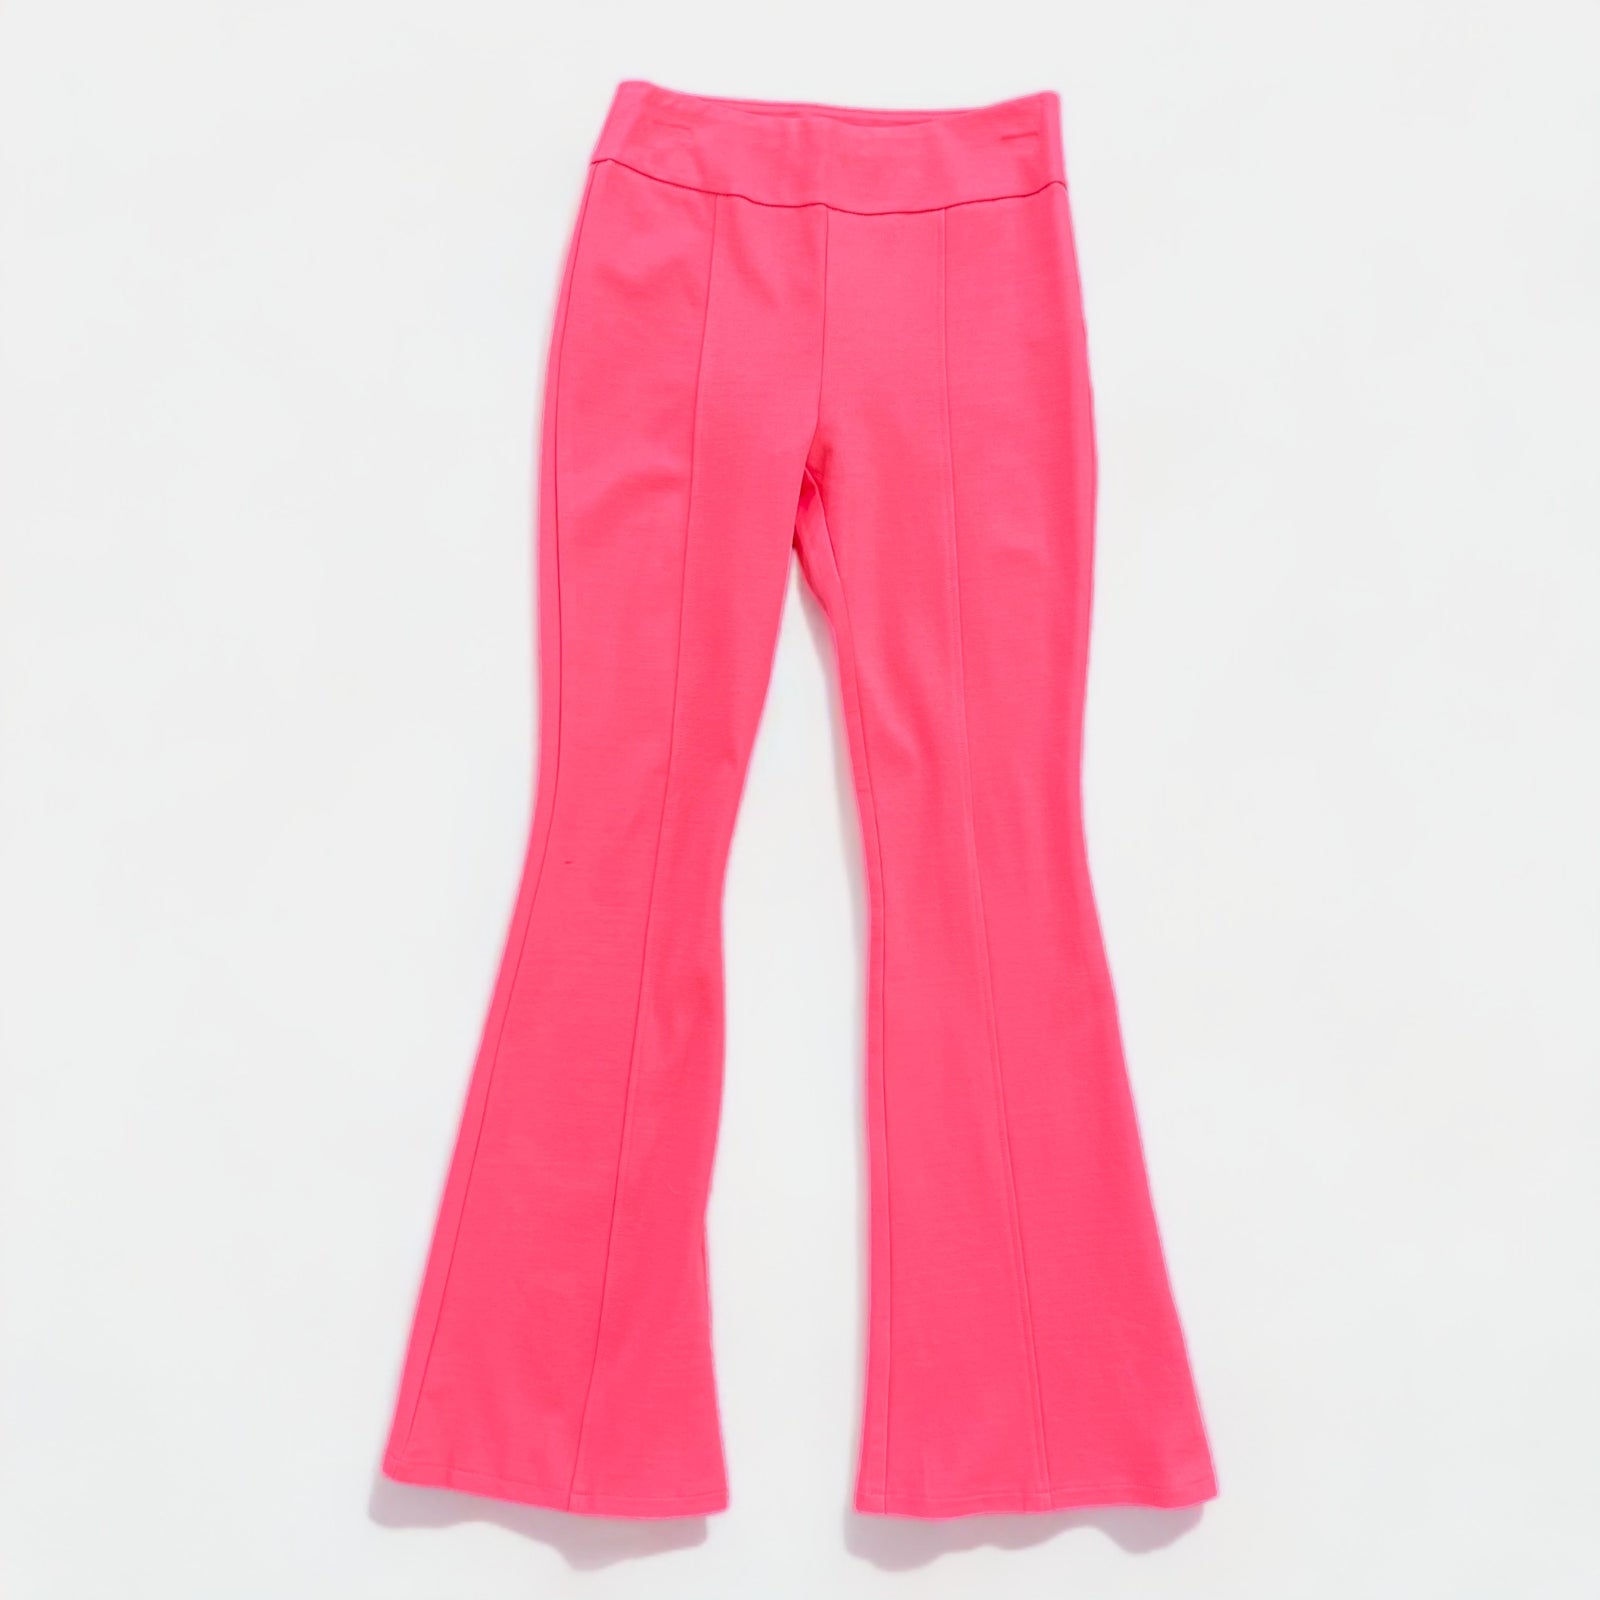 Magenta High Waisted Flare Pants – The ZigZag Stripe